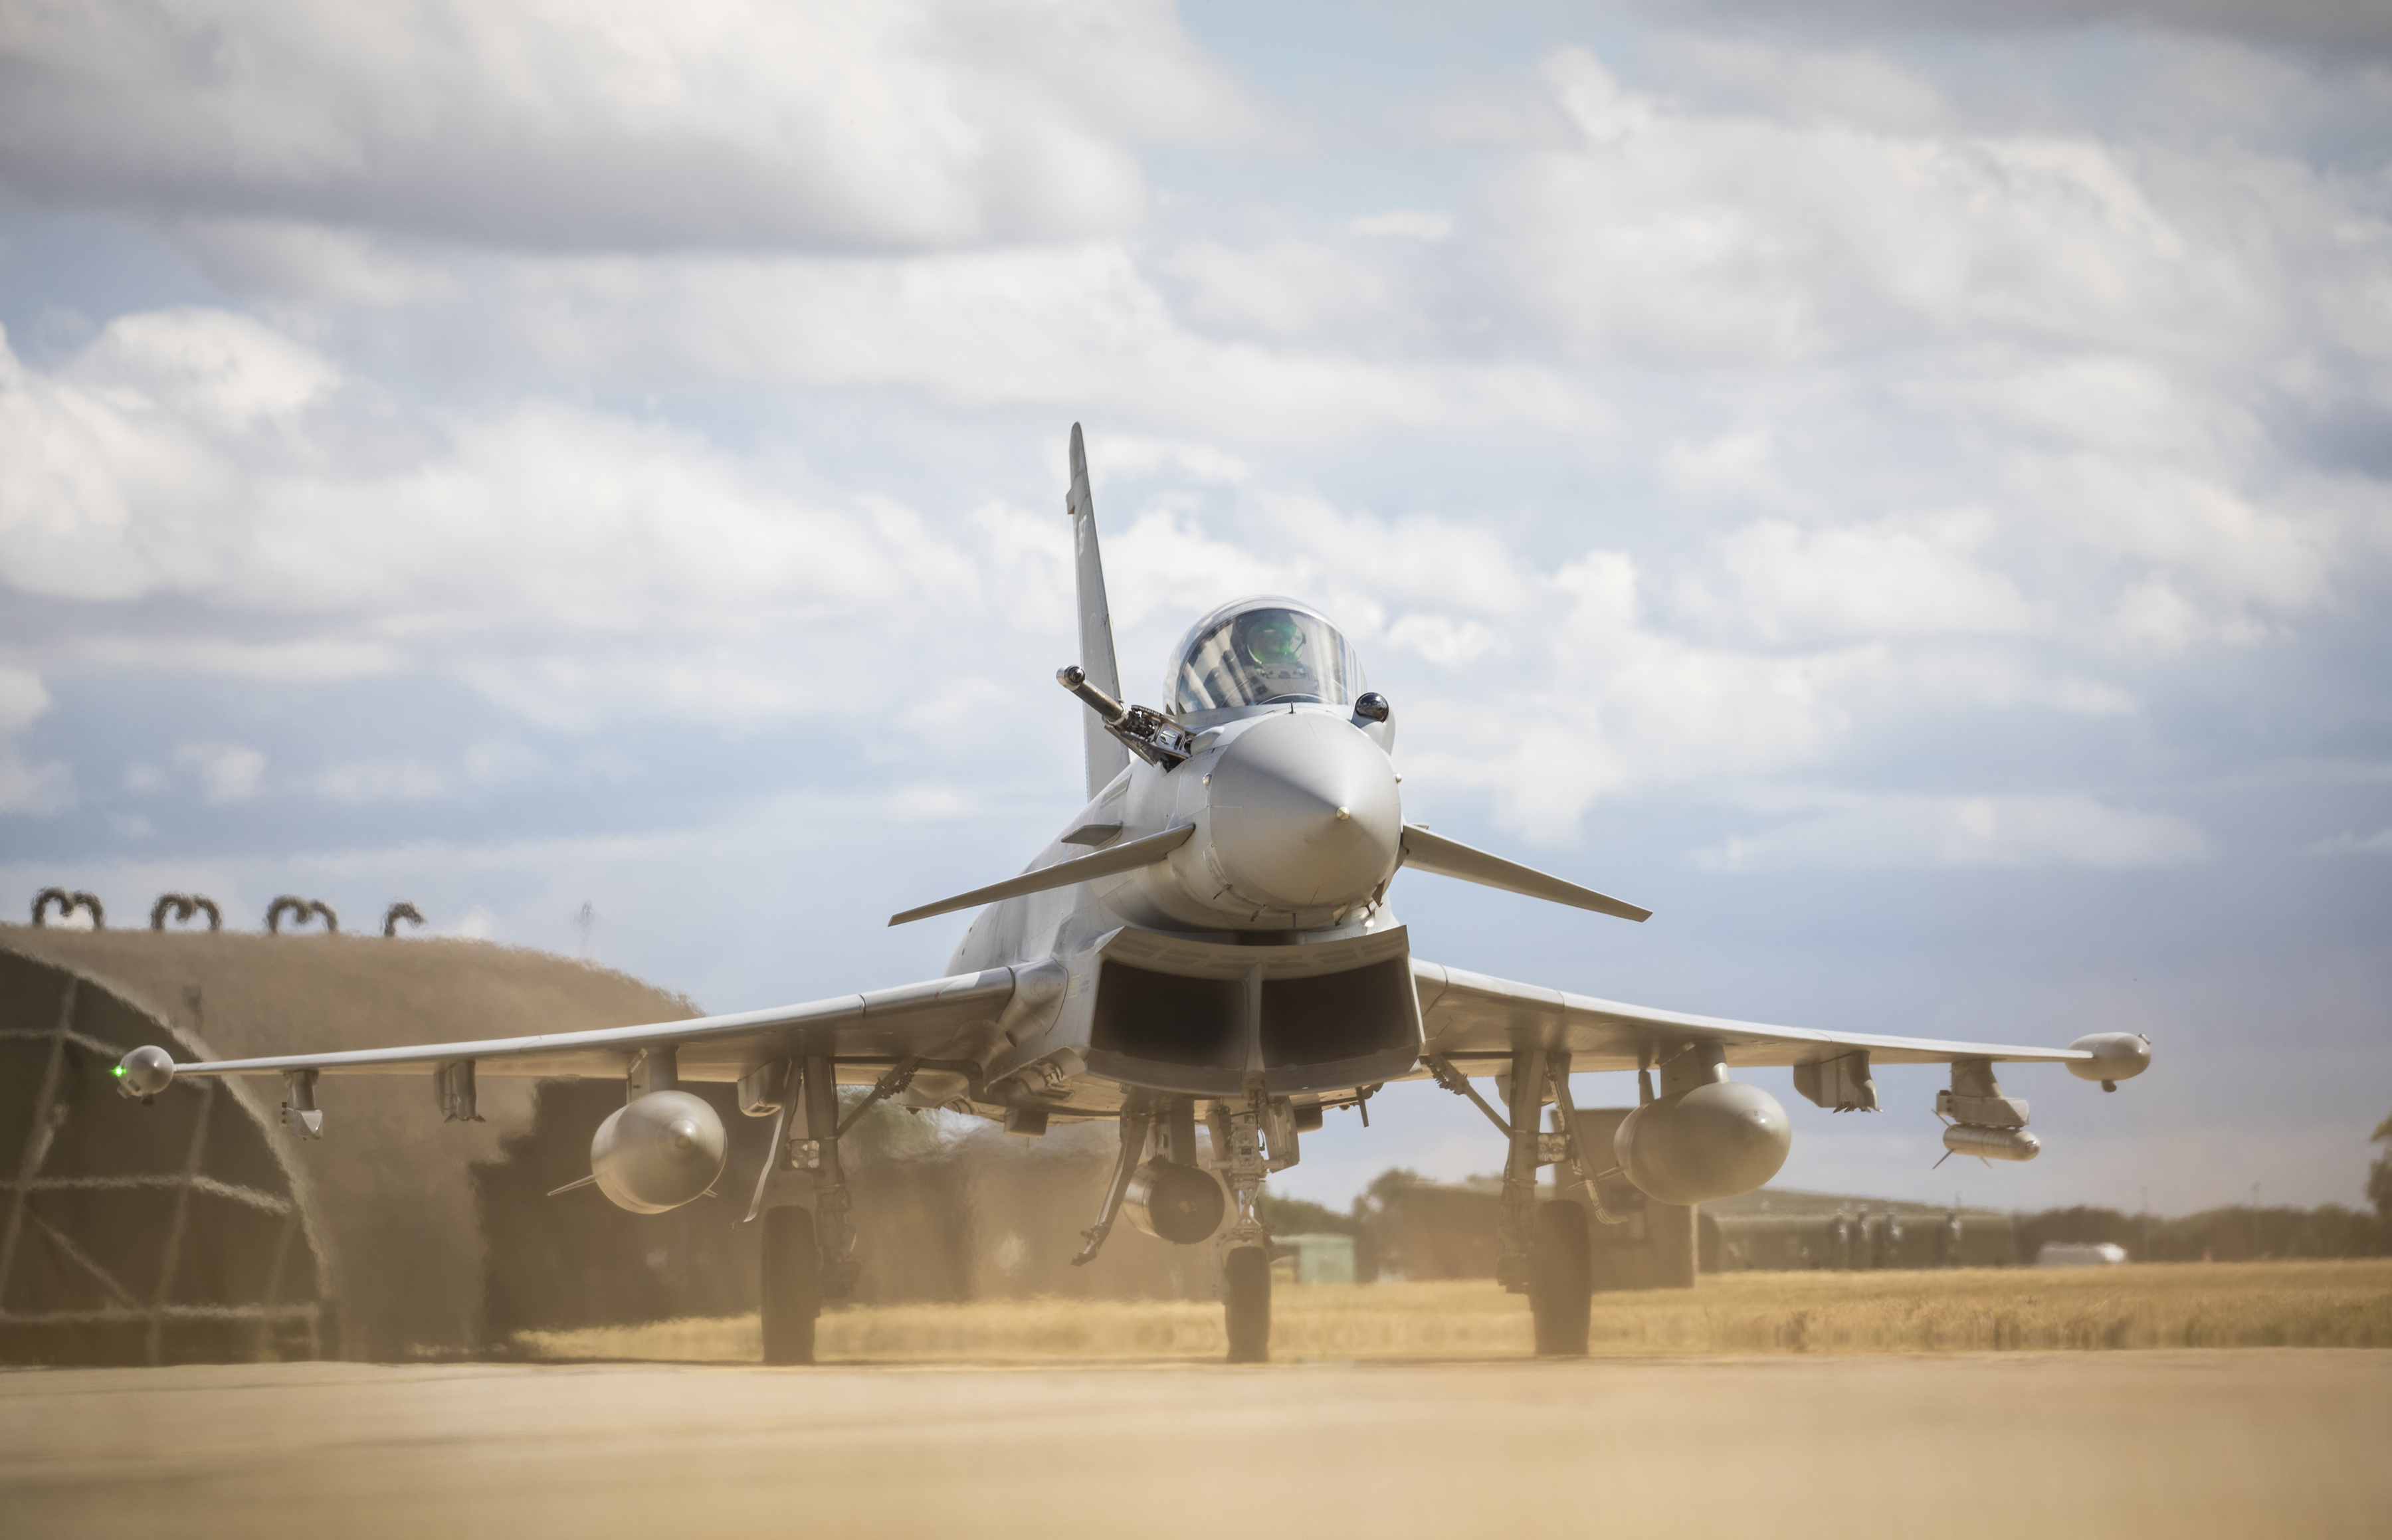 Image shows Typhoon on the airfield.